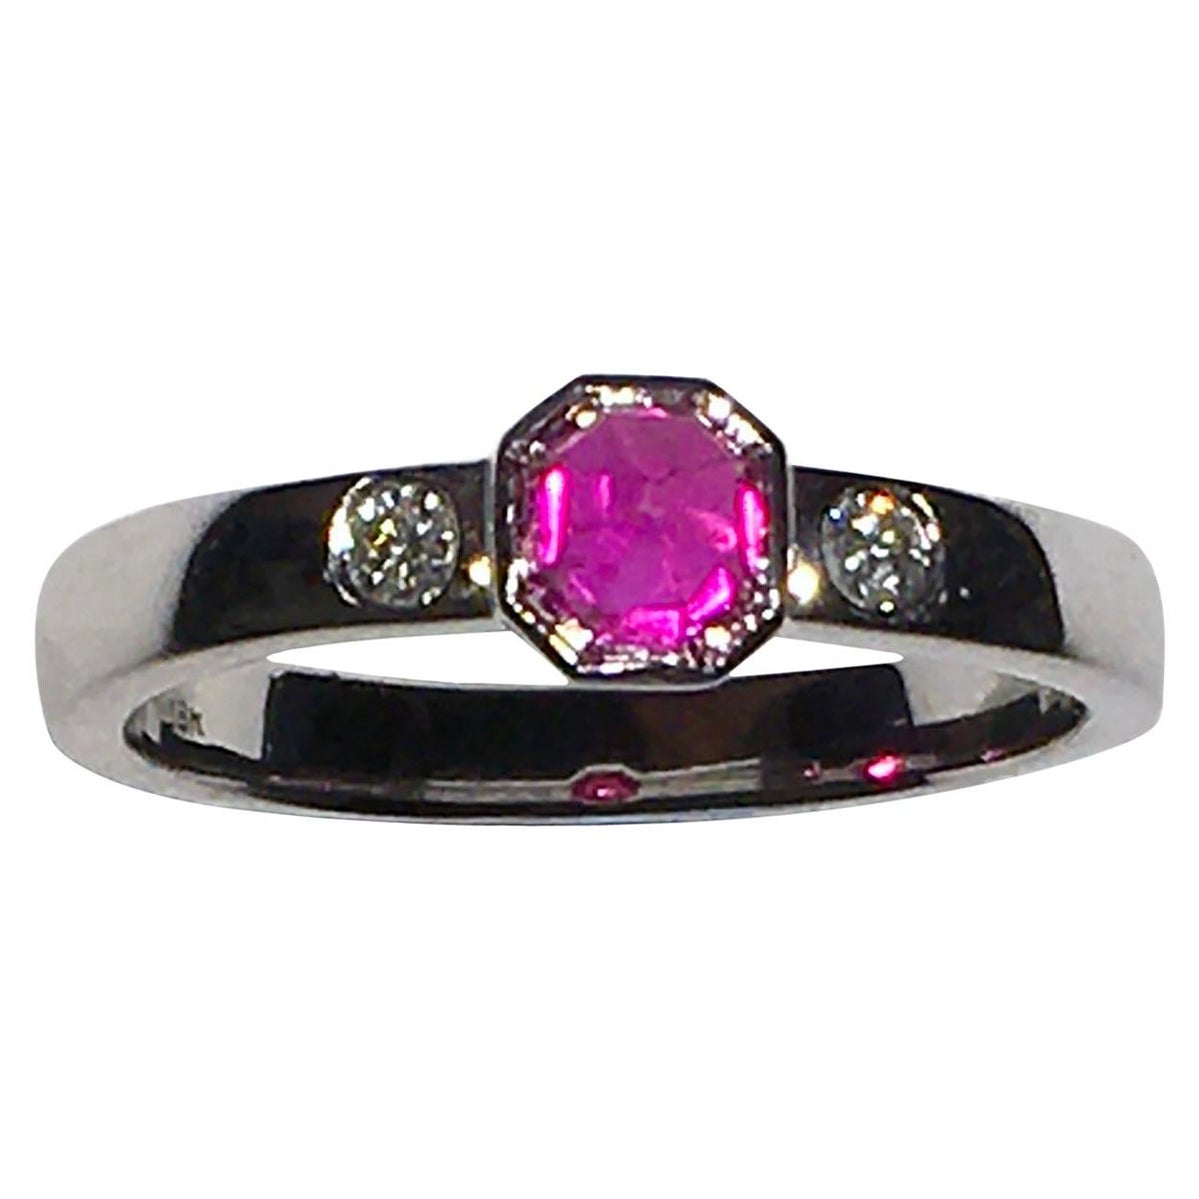 Pink Sapphire & Diamond Ring in 18kt White Gold